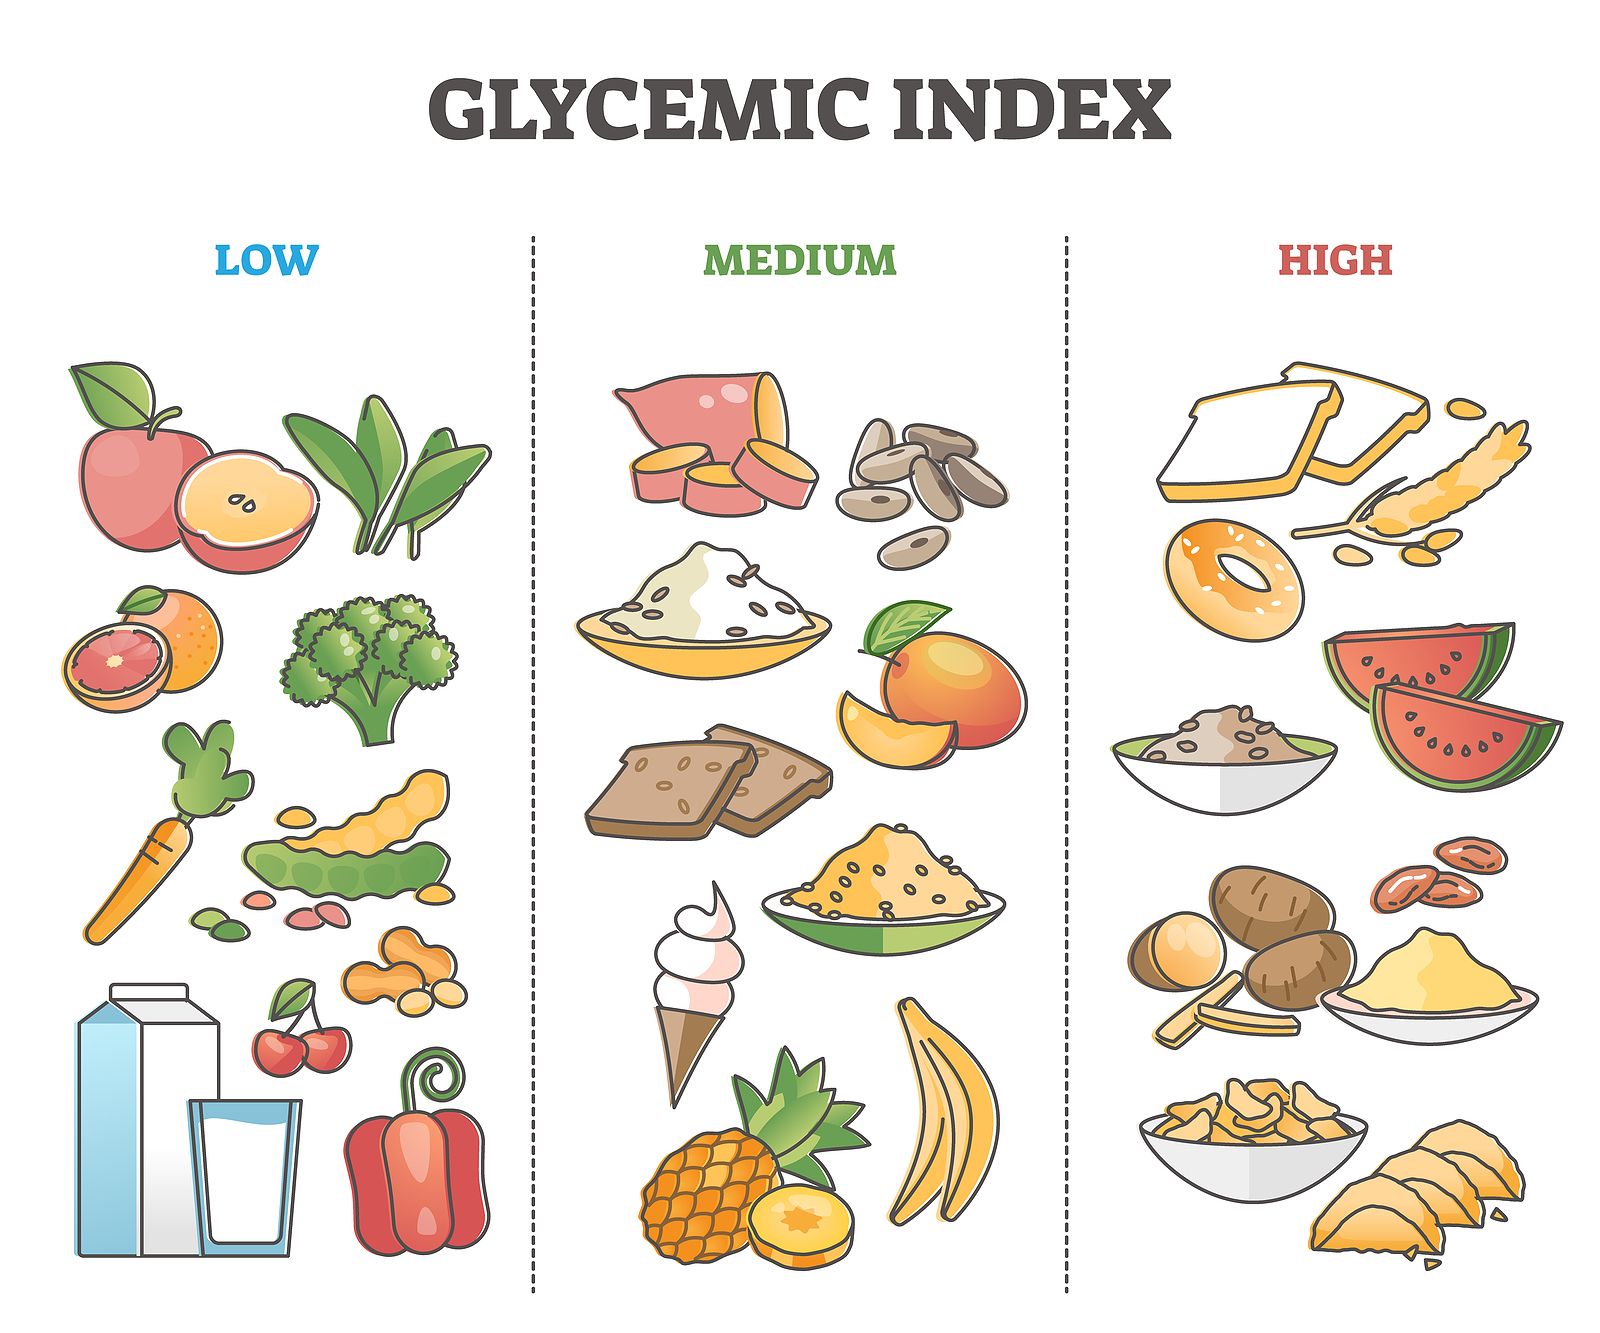 Is Falling Asleep After Eating a Sign of Diabetes? Explore how glycemic index can affect tiredness after eating.